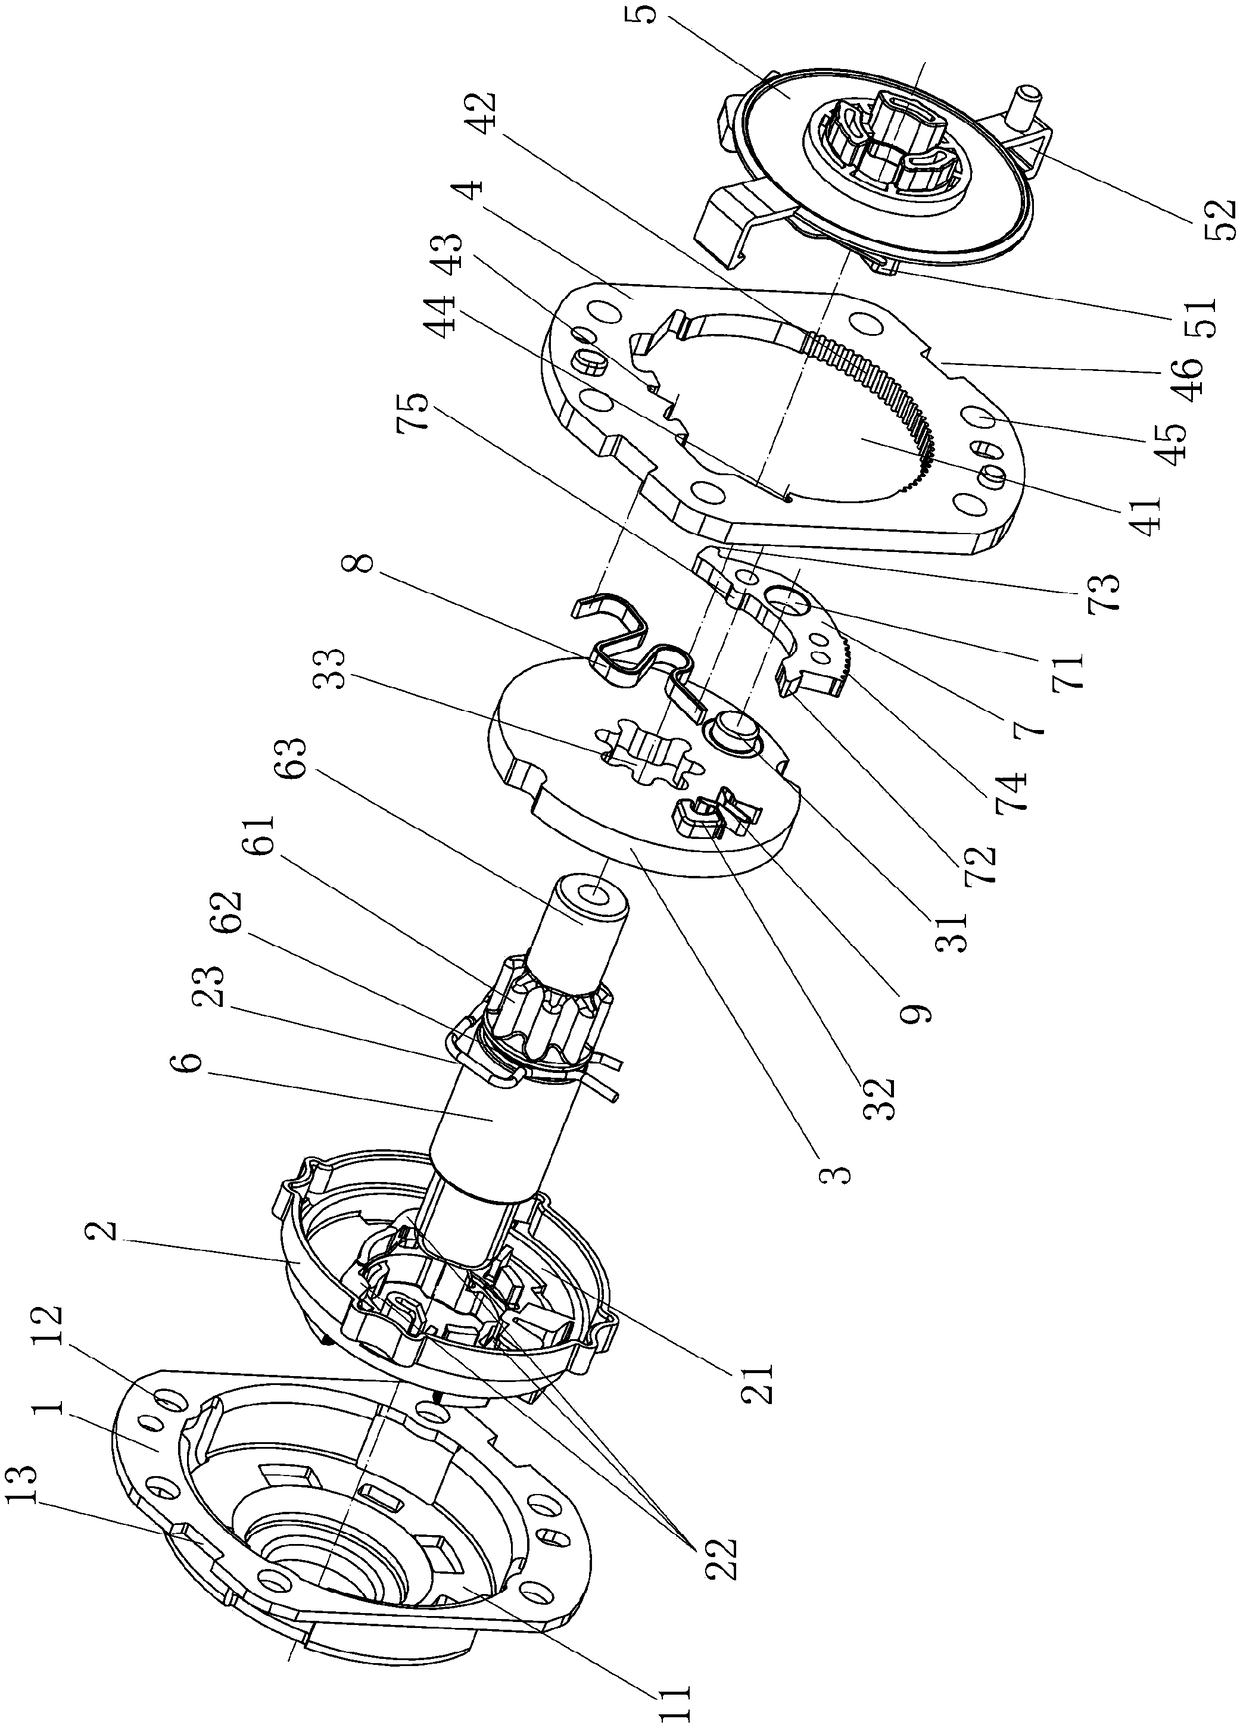 Armrest locking device for automobile seat